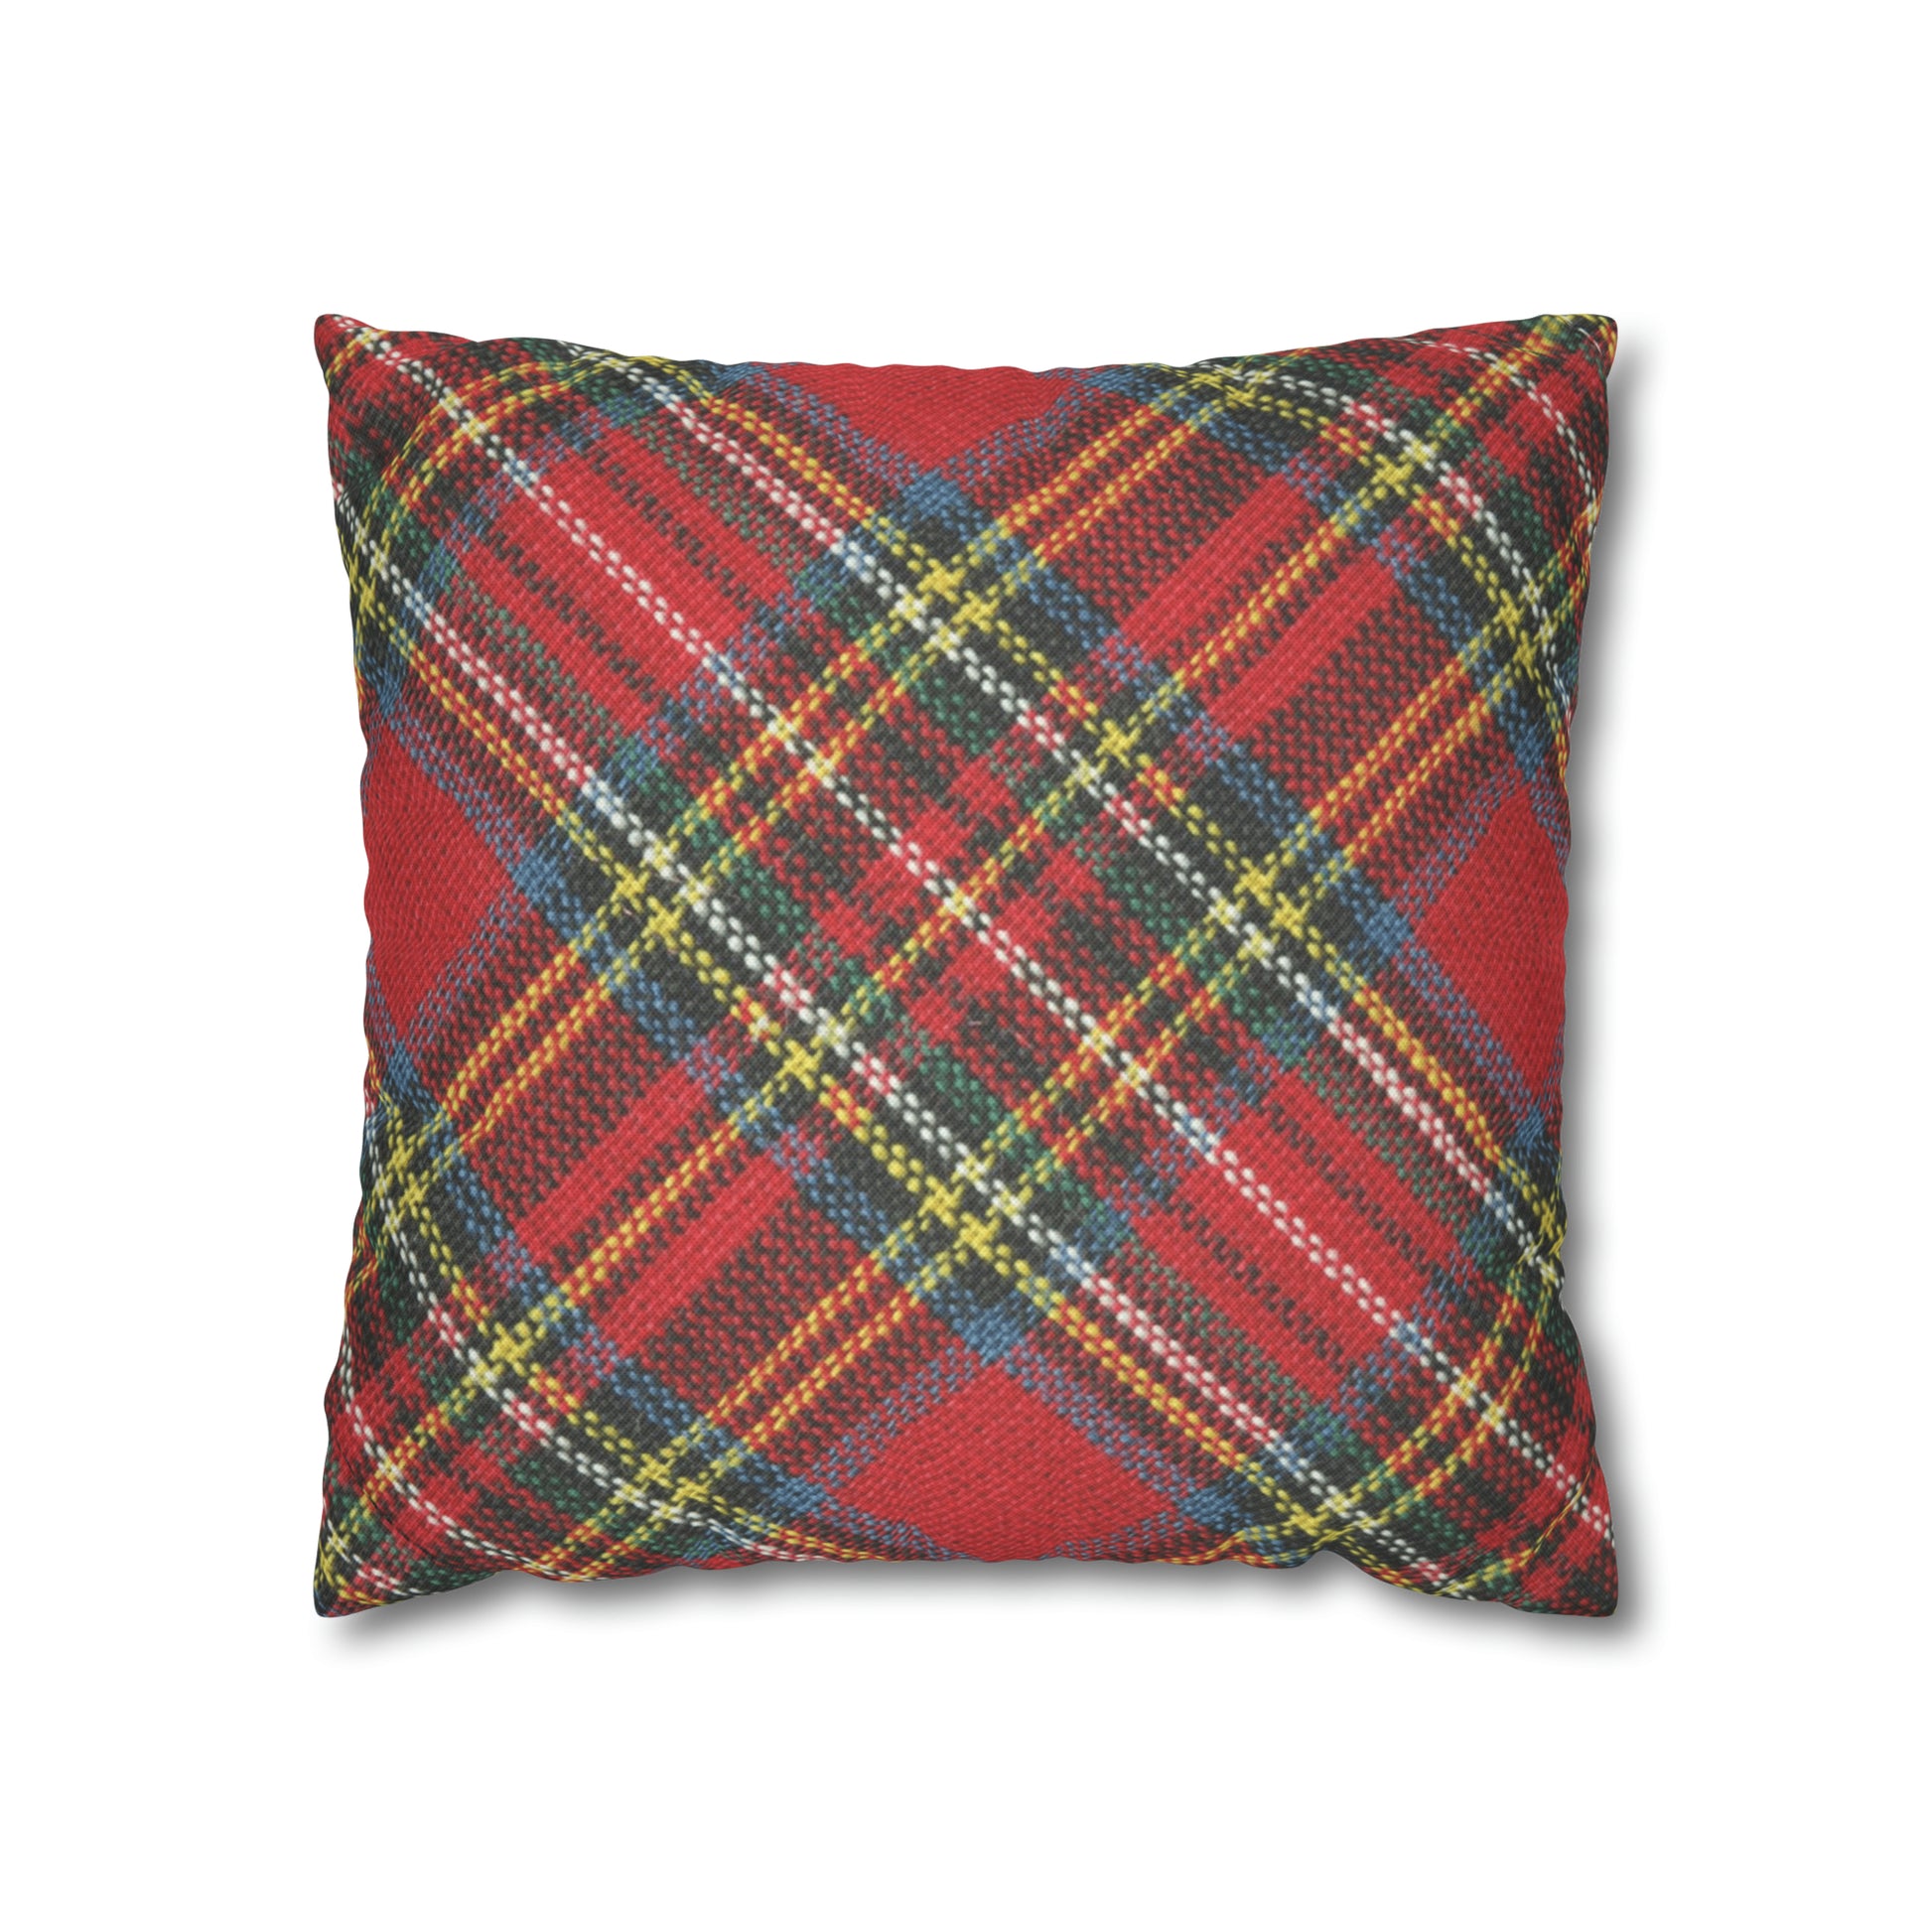 This Printify red-plaid pillow case is perfect for adding a pop of color to your home decor. Crafted from easy-care fabric, the red accents will instantly brighten up any room.